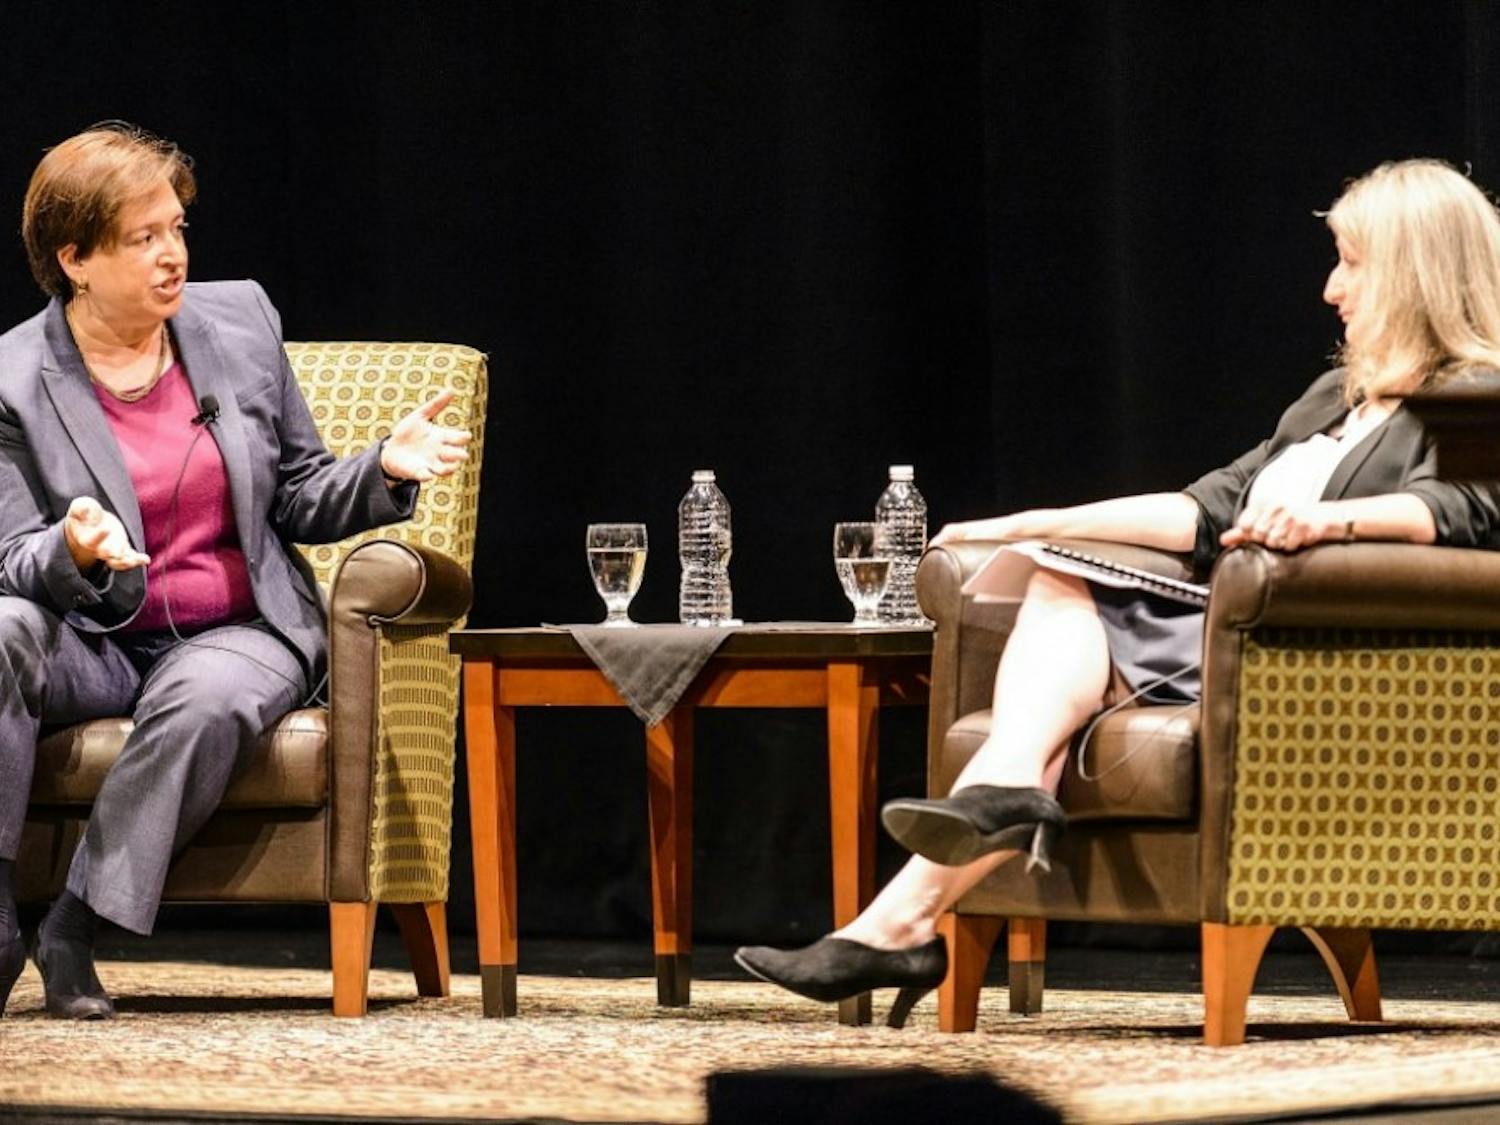 U.S. Supreme Court Associate Justice Elena Kagan (left) expressed her love of academics during her talk at Memorial Union Friday.